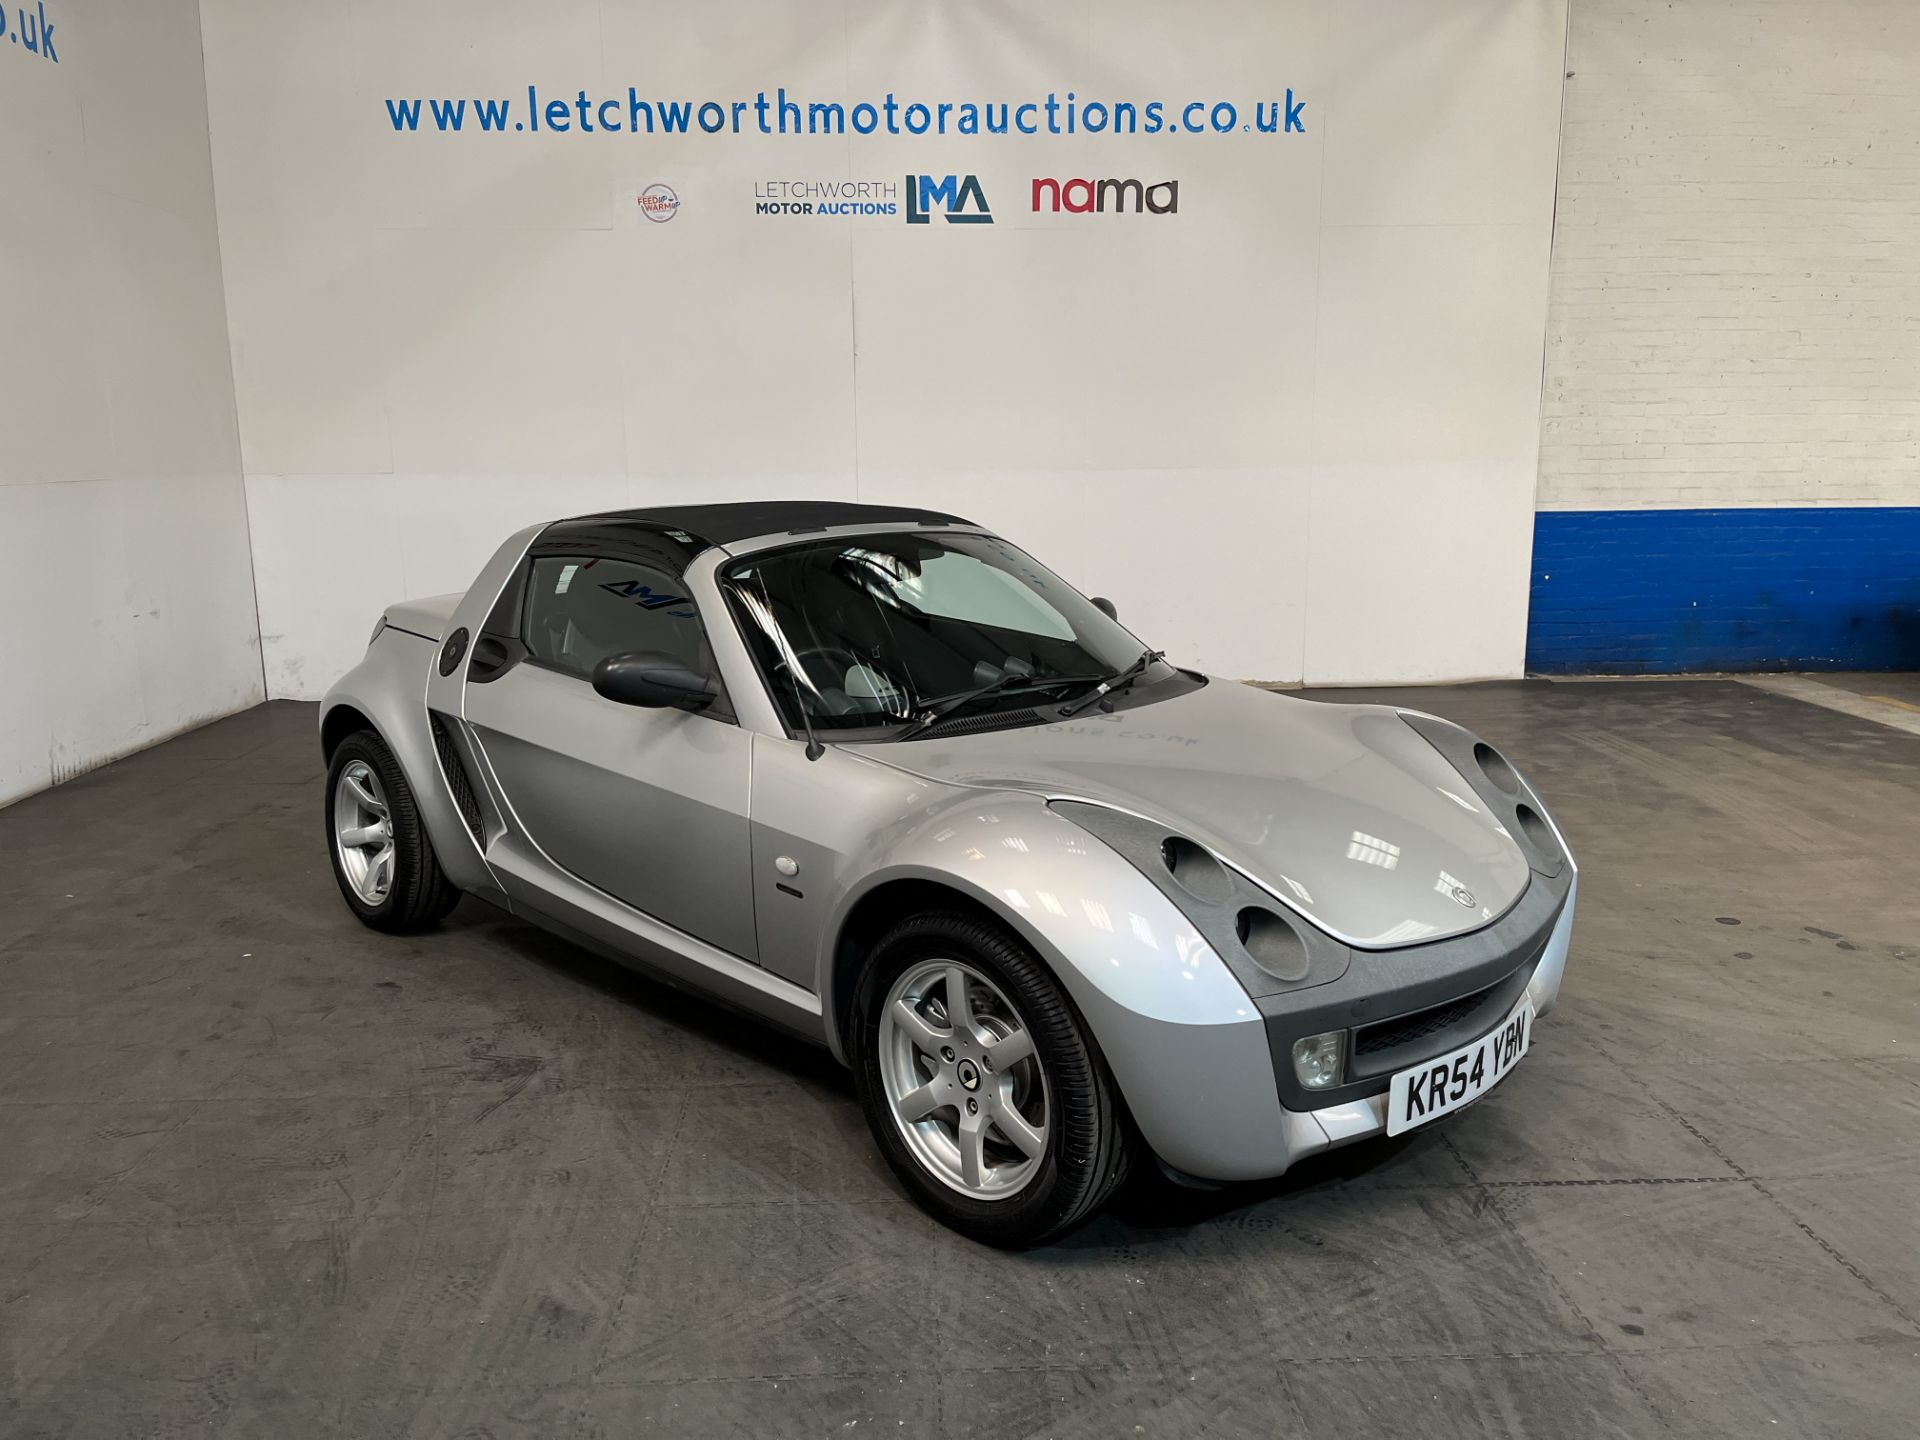 2004 Smart Roadster Speedsilver Auto - 698cc - Image 2 of 22